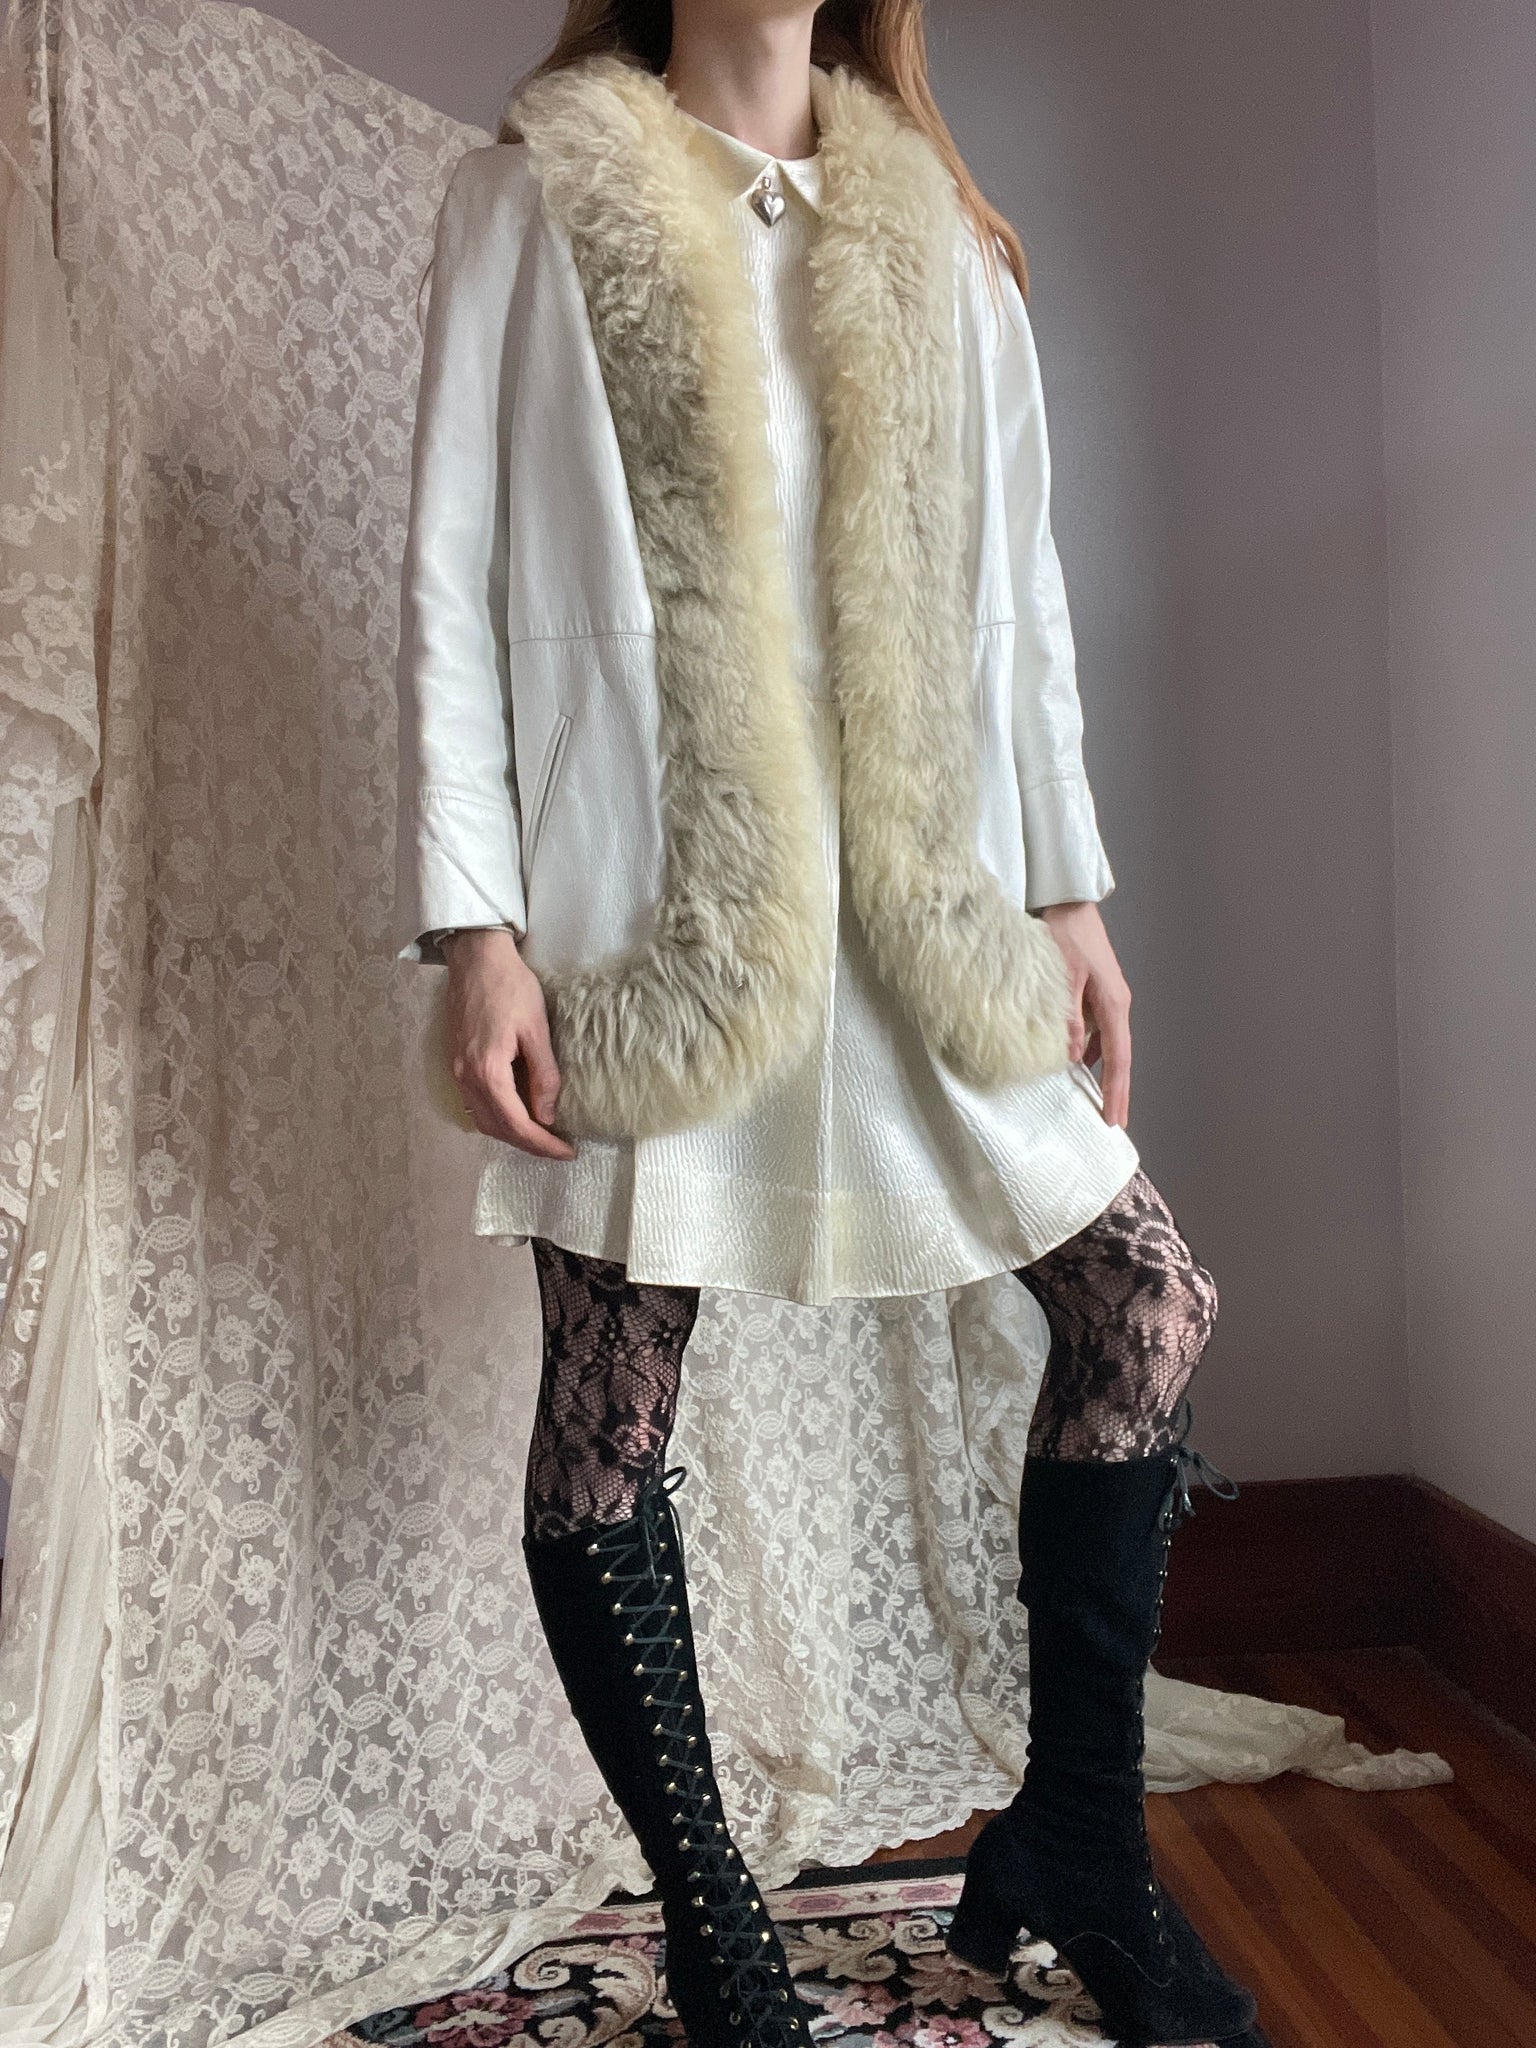 1960s White Leather Fur Coat Trimmed